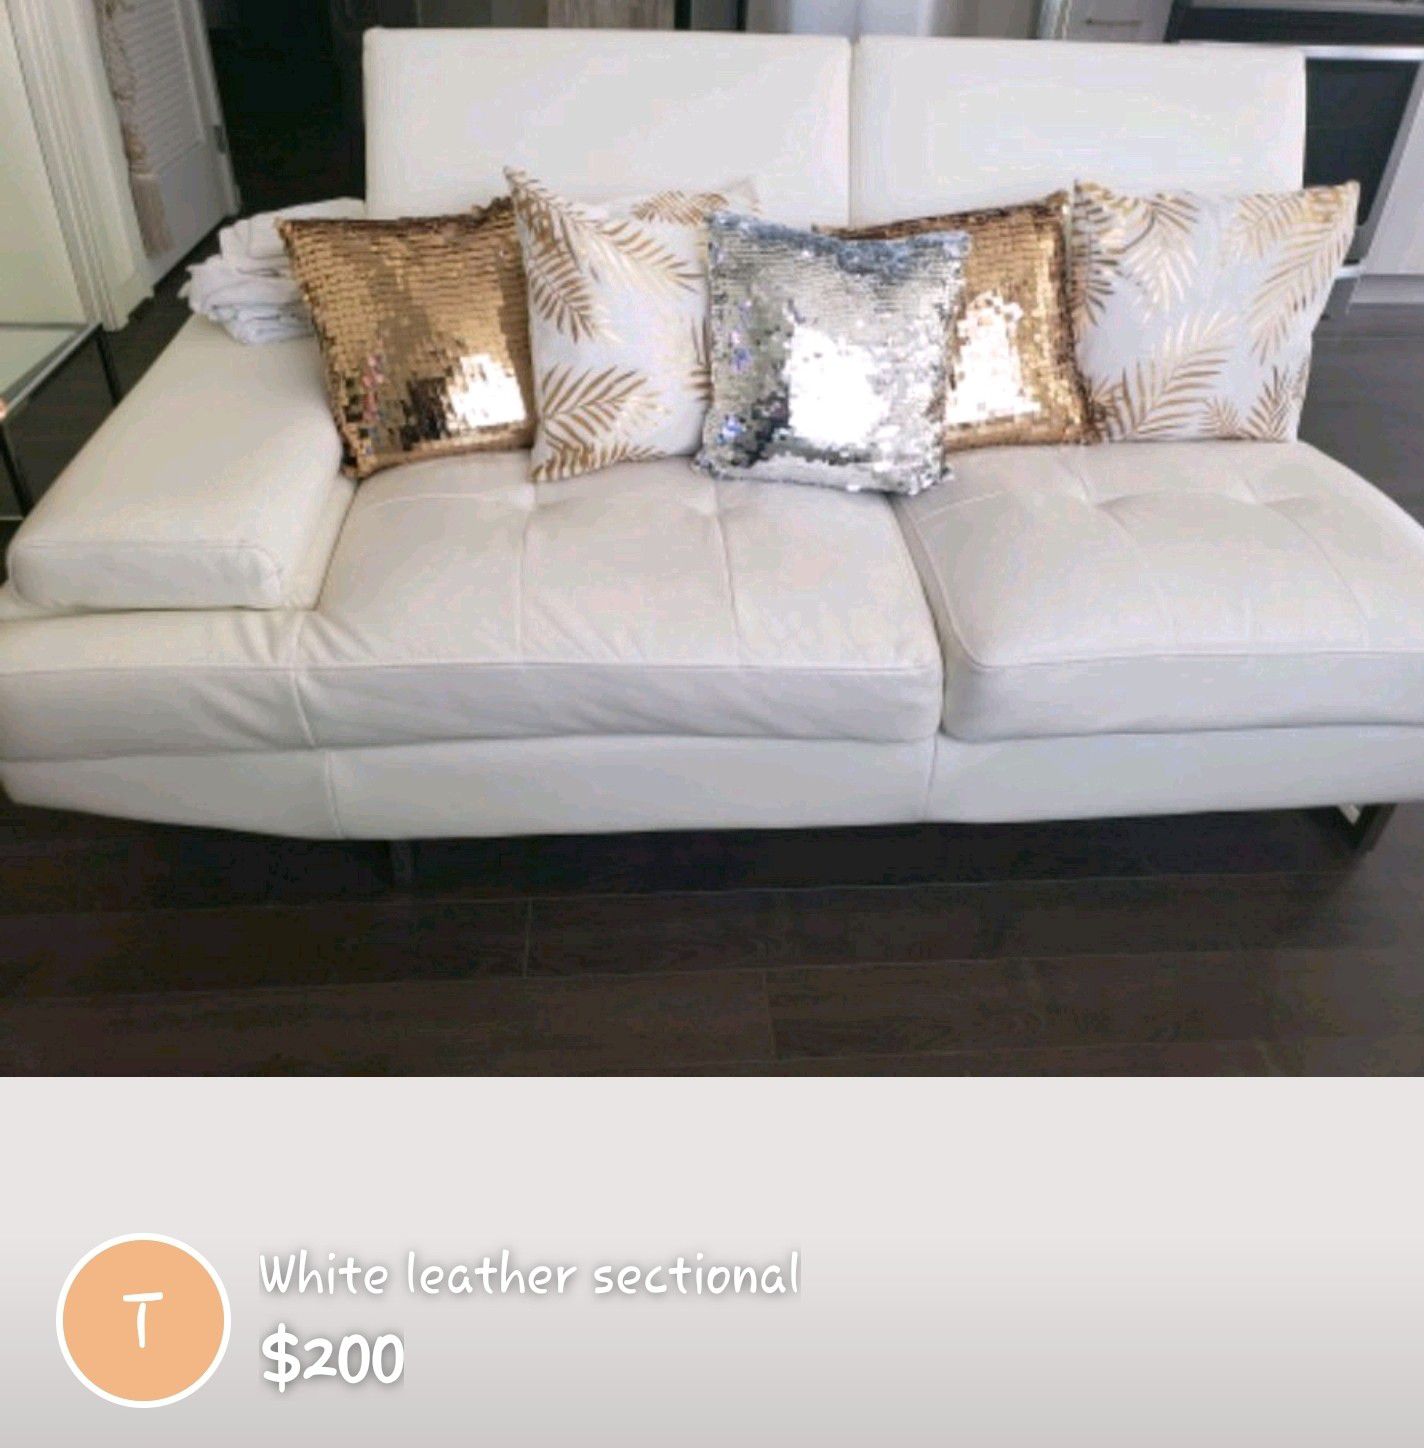 White leather sectional $200